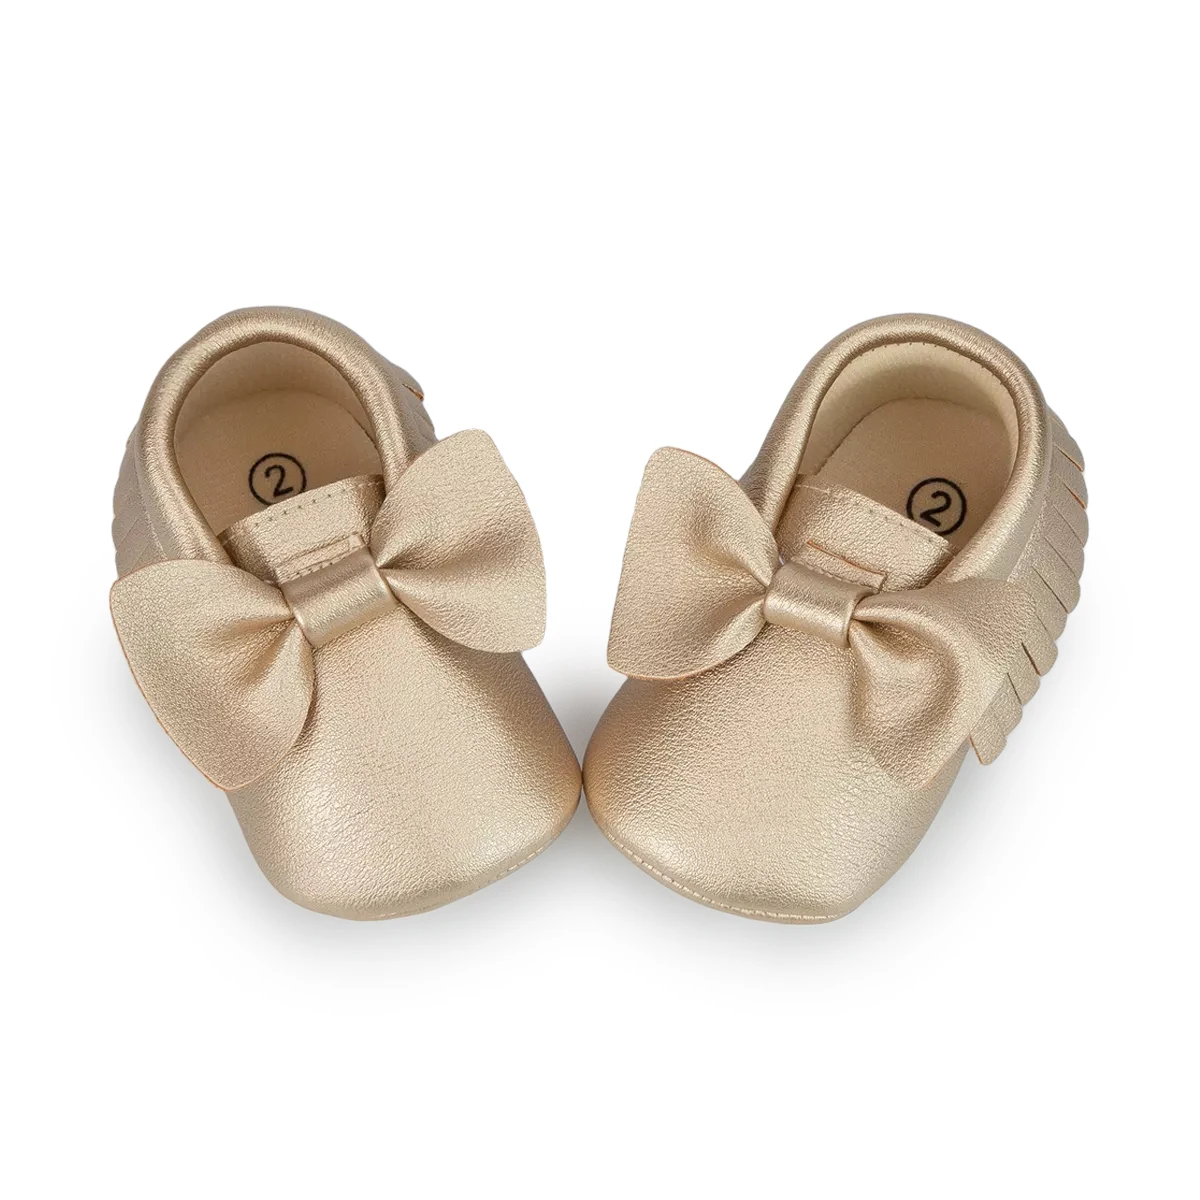 New Newborn Baby Walking Shoes Solid Color Bow Casual Shoes PU Tassel Shoes Baby Anti-slip Soft Cotton Sole Female Baby Shoes